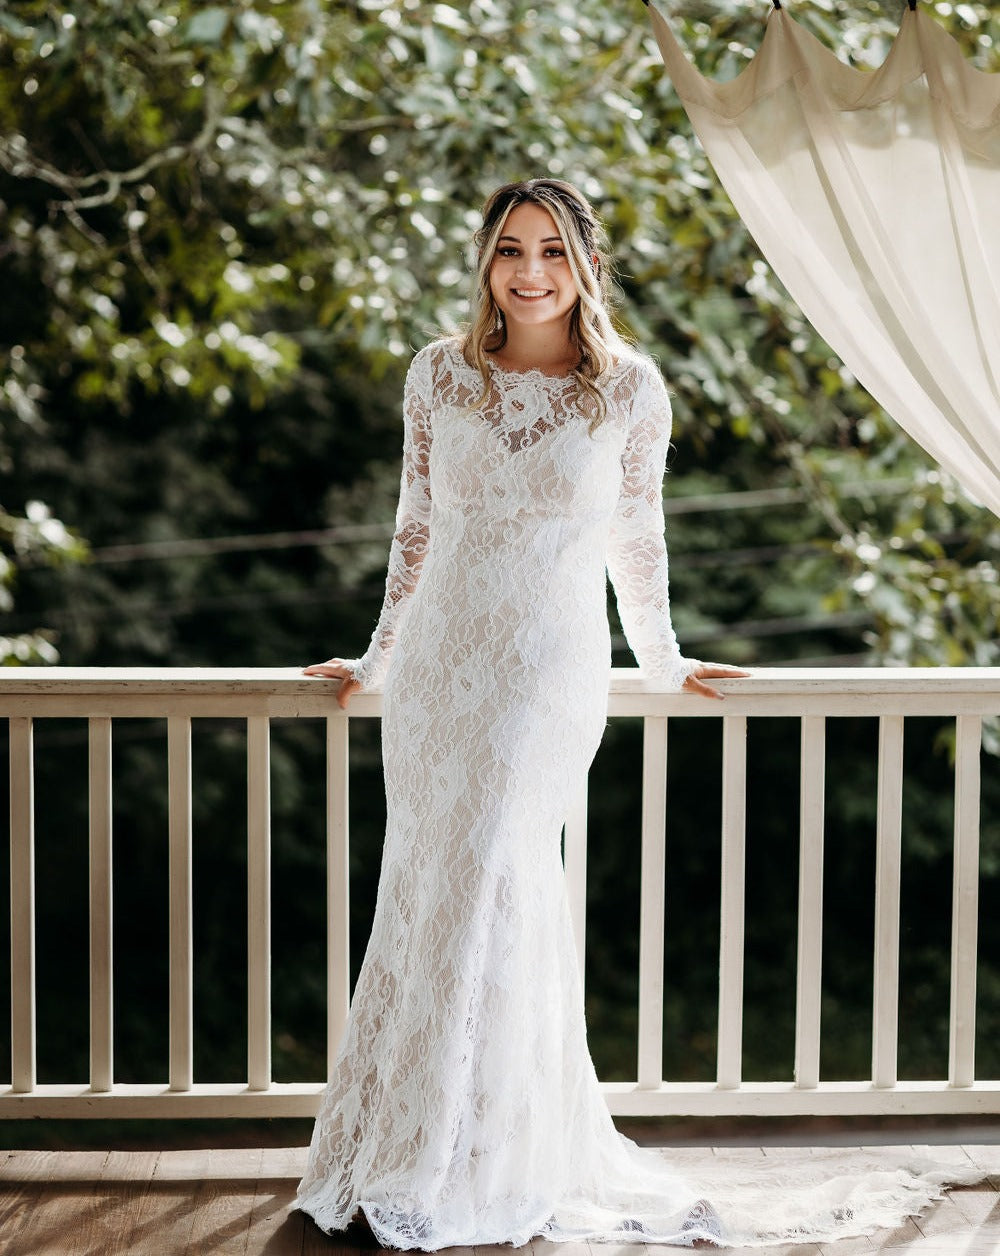 Lace wedding gowns with sleeves in Nigeria - Legit.ng